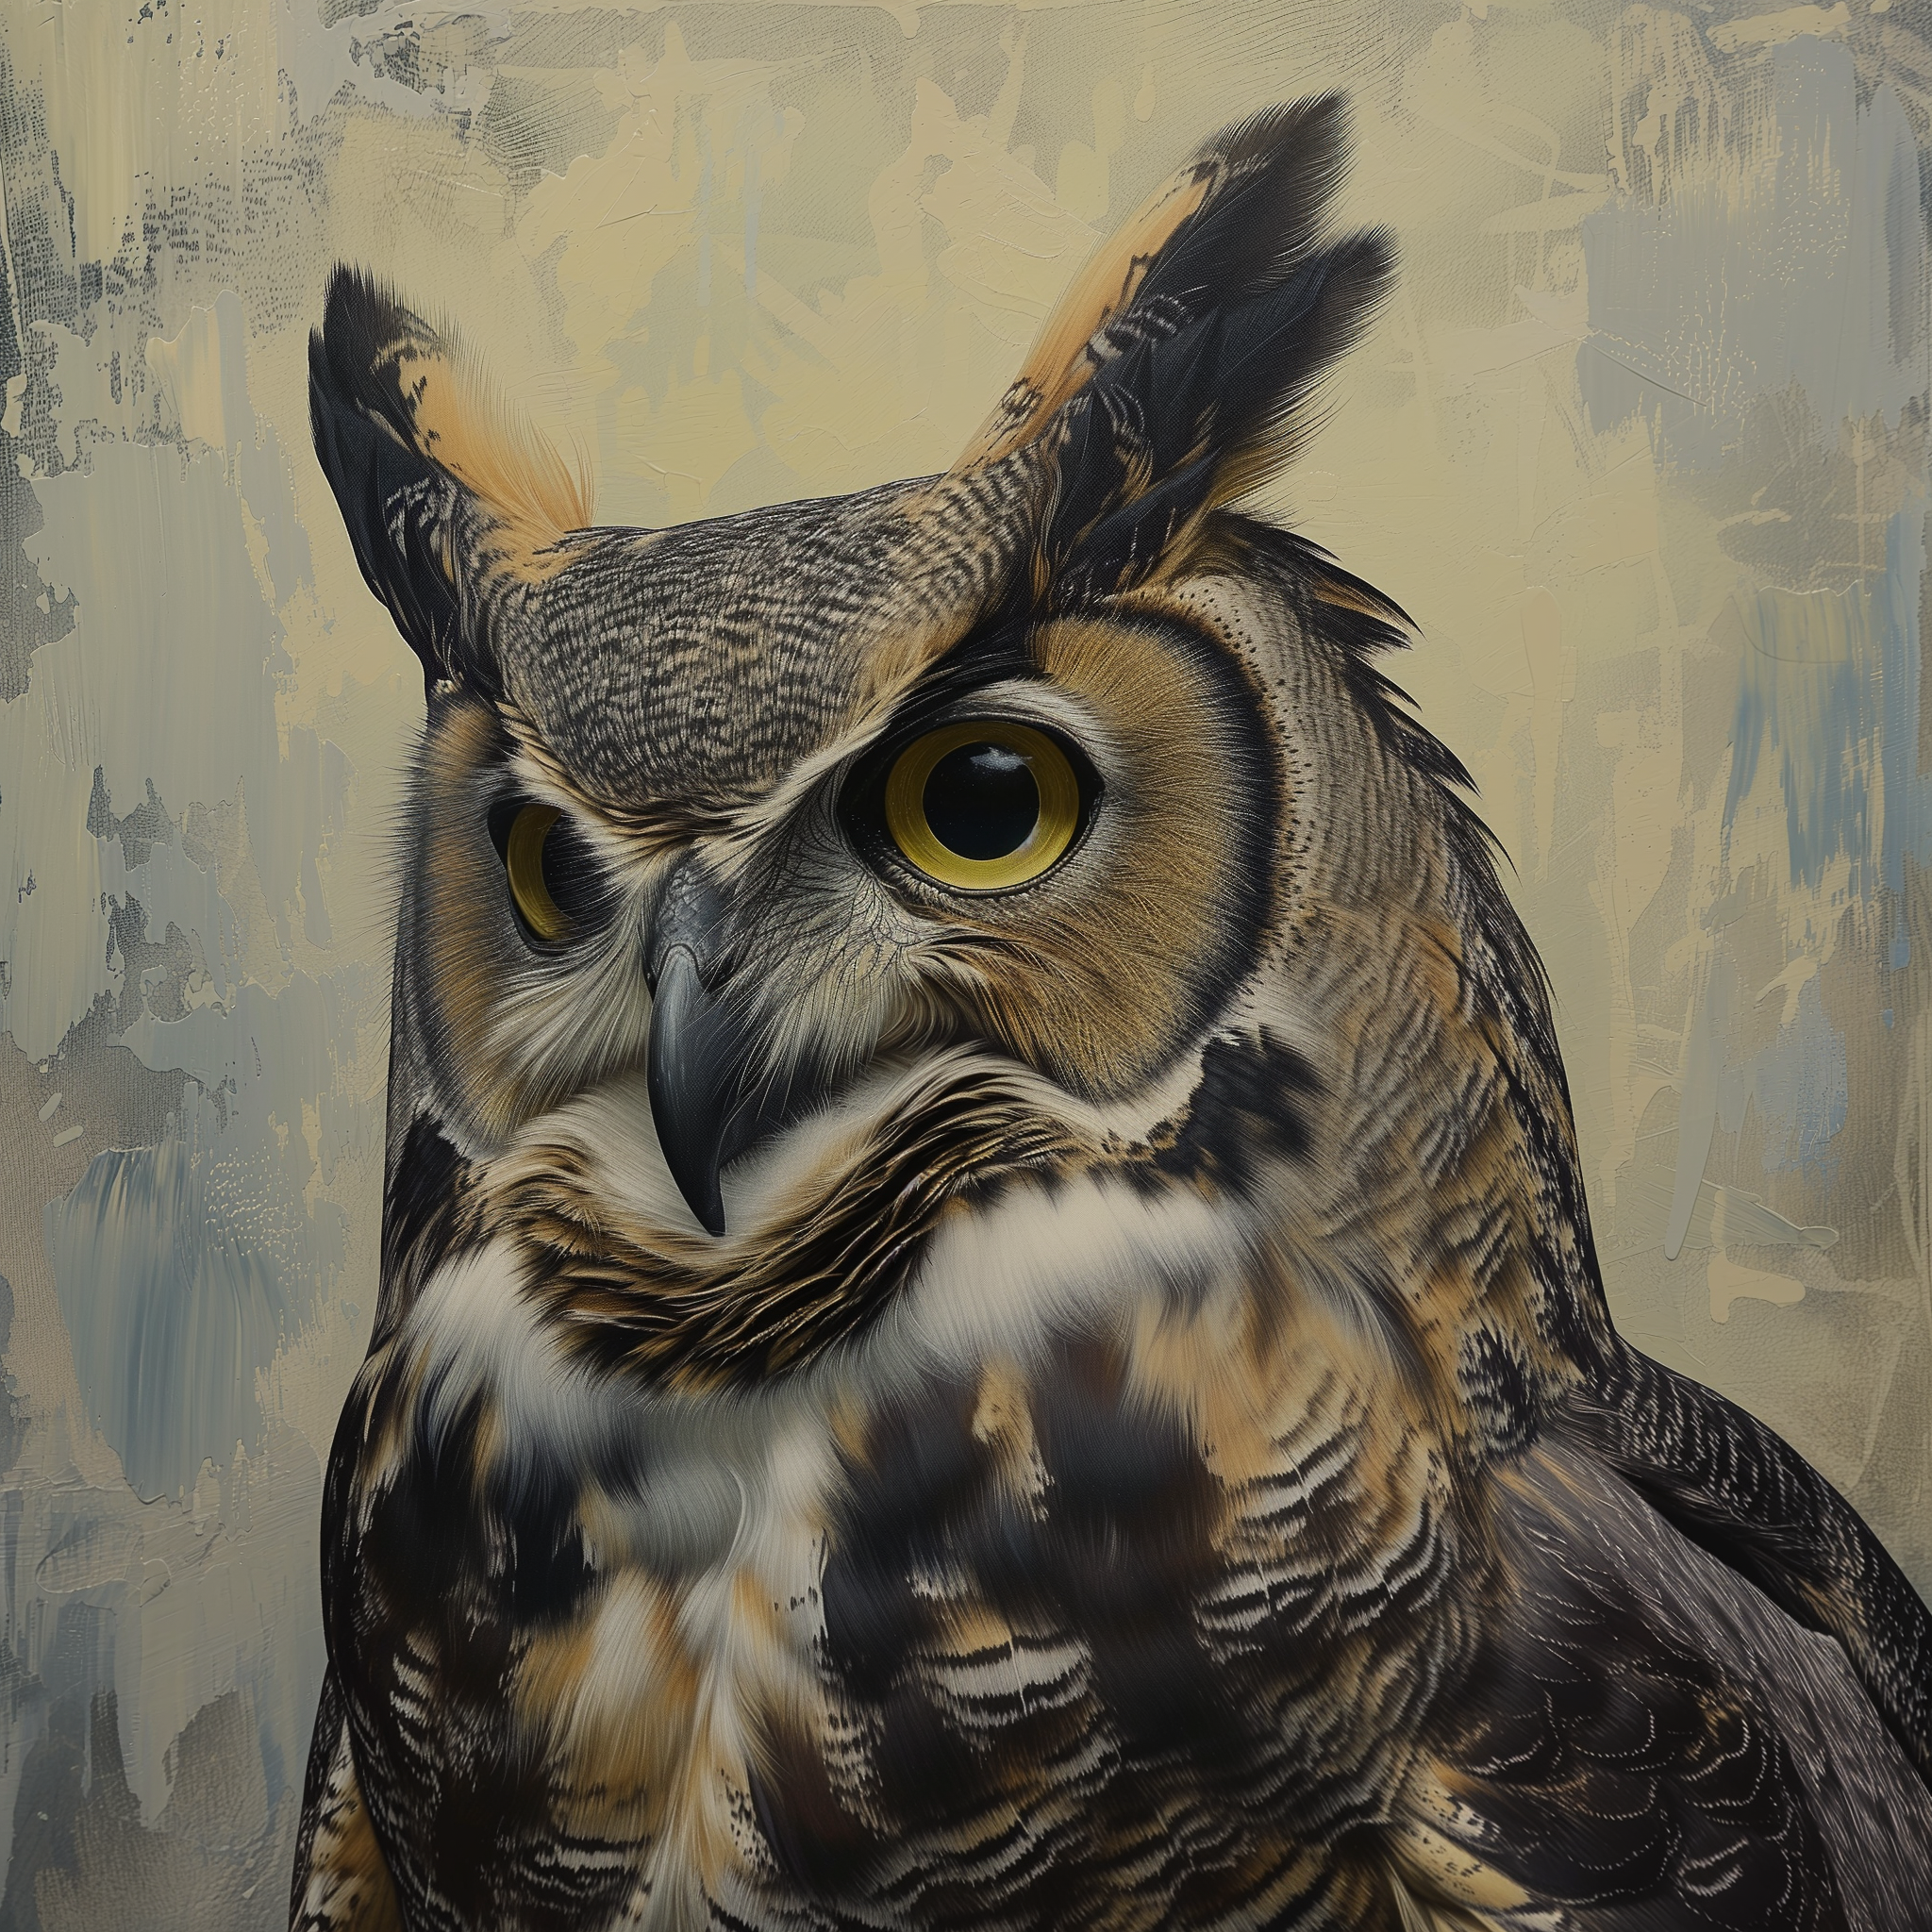 Avatar of a Great Horned Owl with piercing yellow eyes and detailed feathers against a textured background.